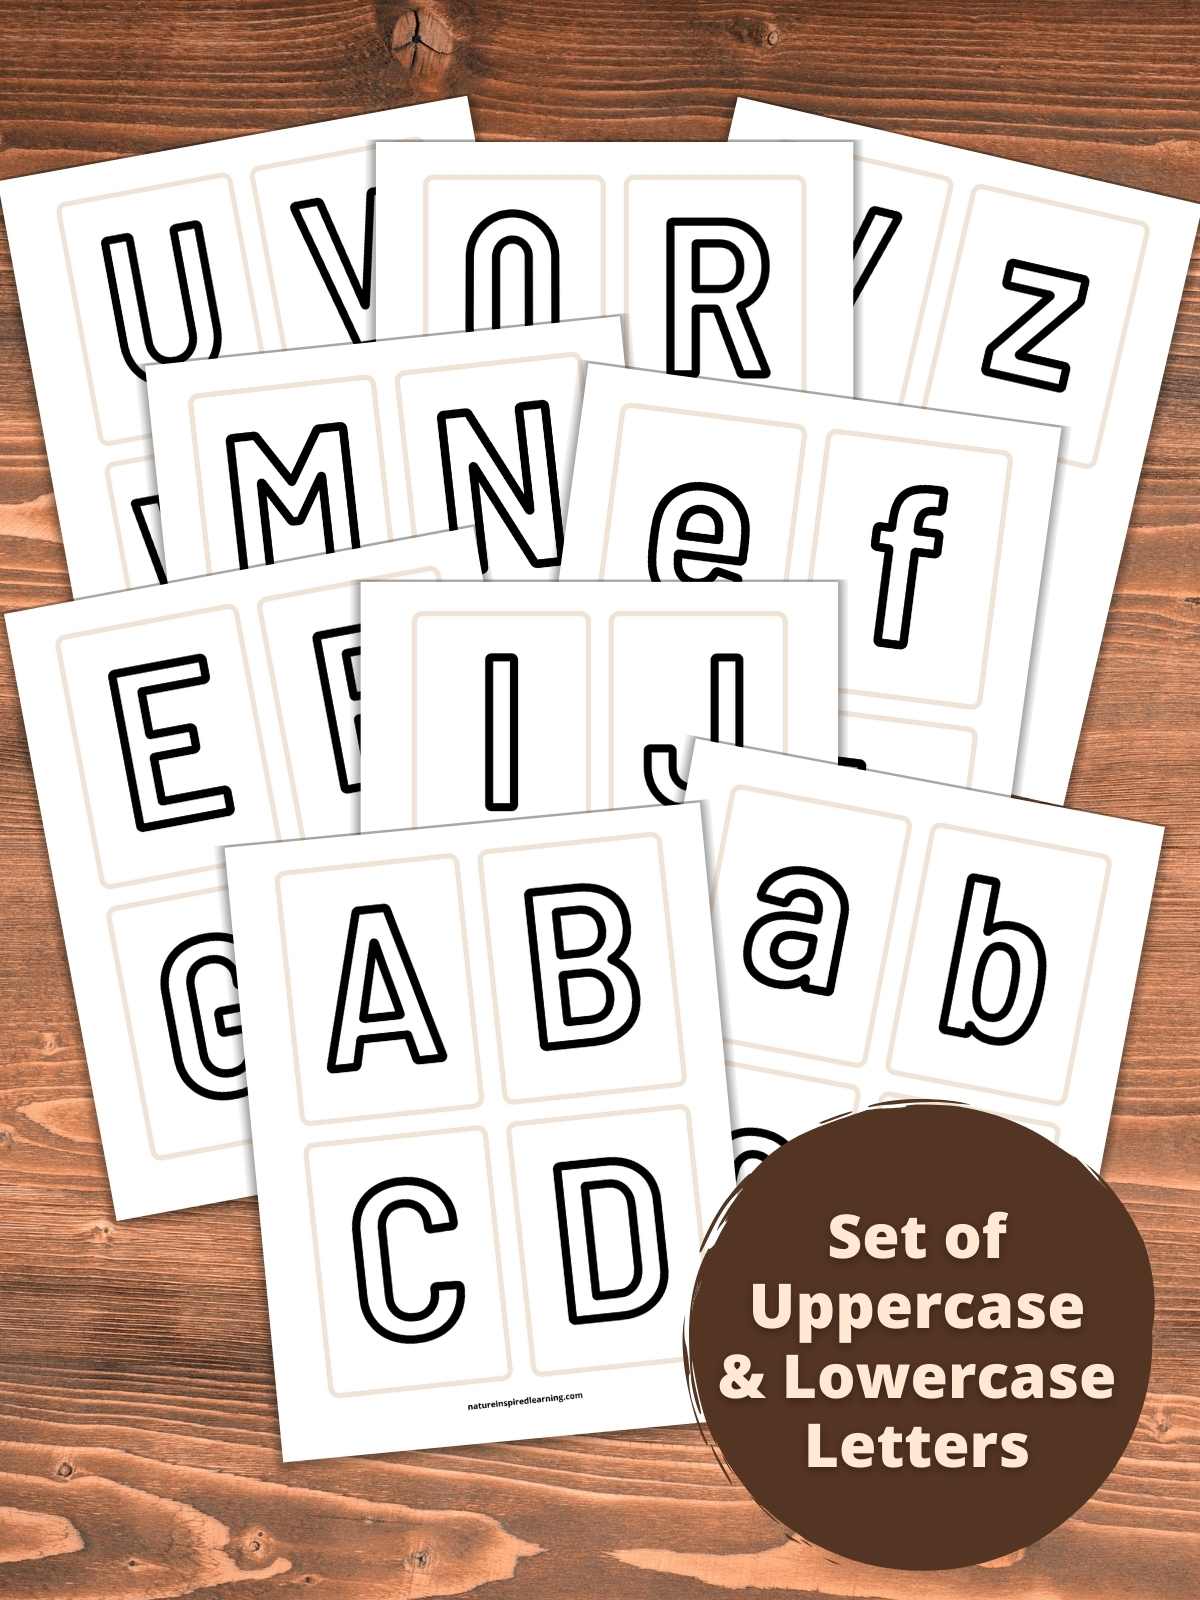 printed out set of uppercase and lowercase letters on flashcards overlapping on a wooden background. Dark brown circle bottom right with text overlay